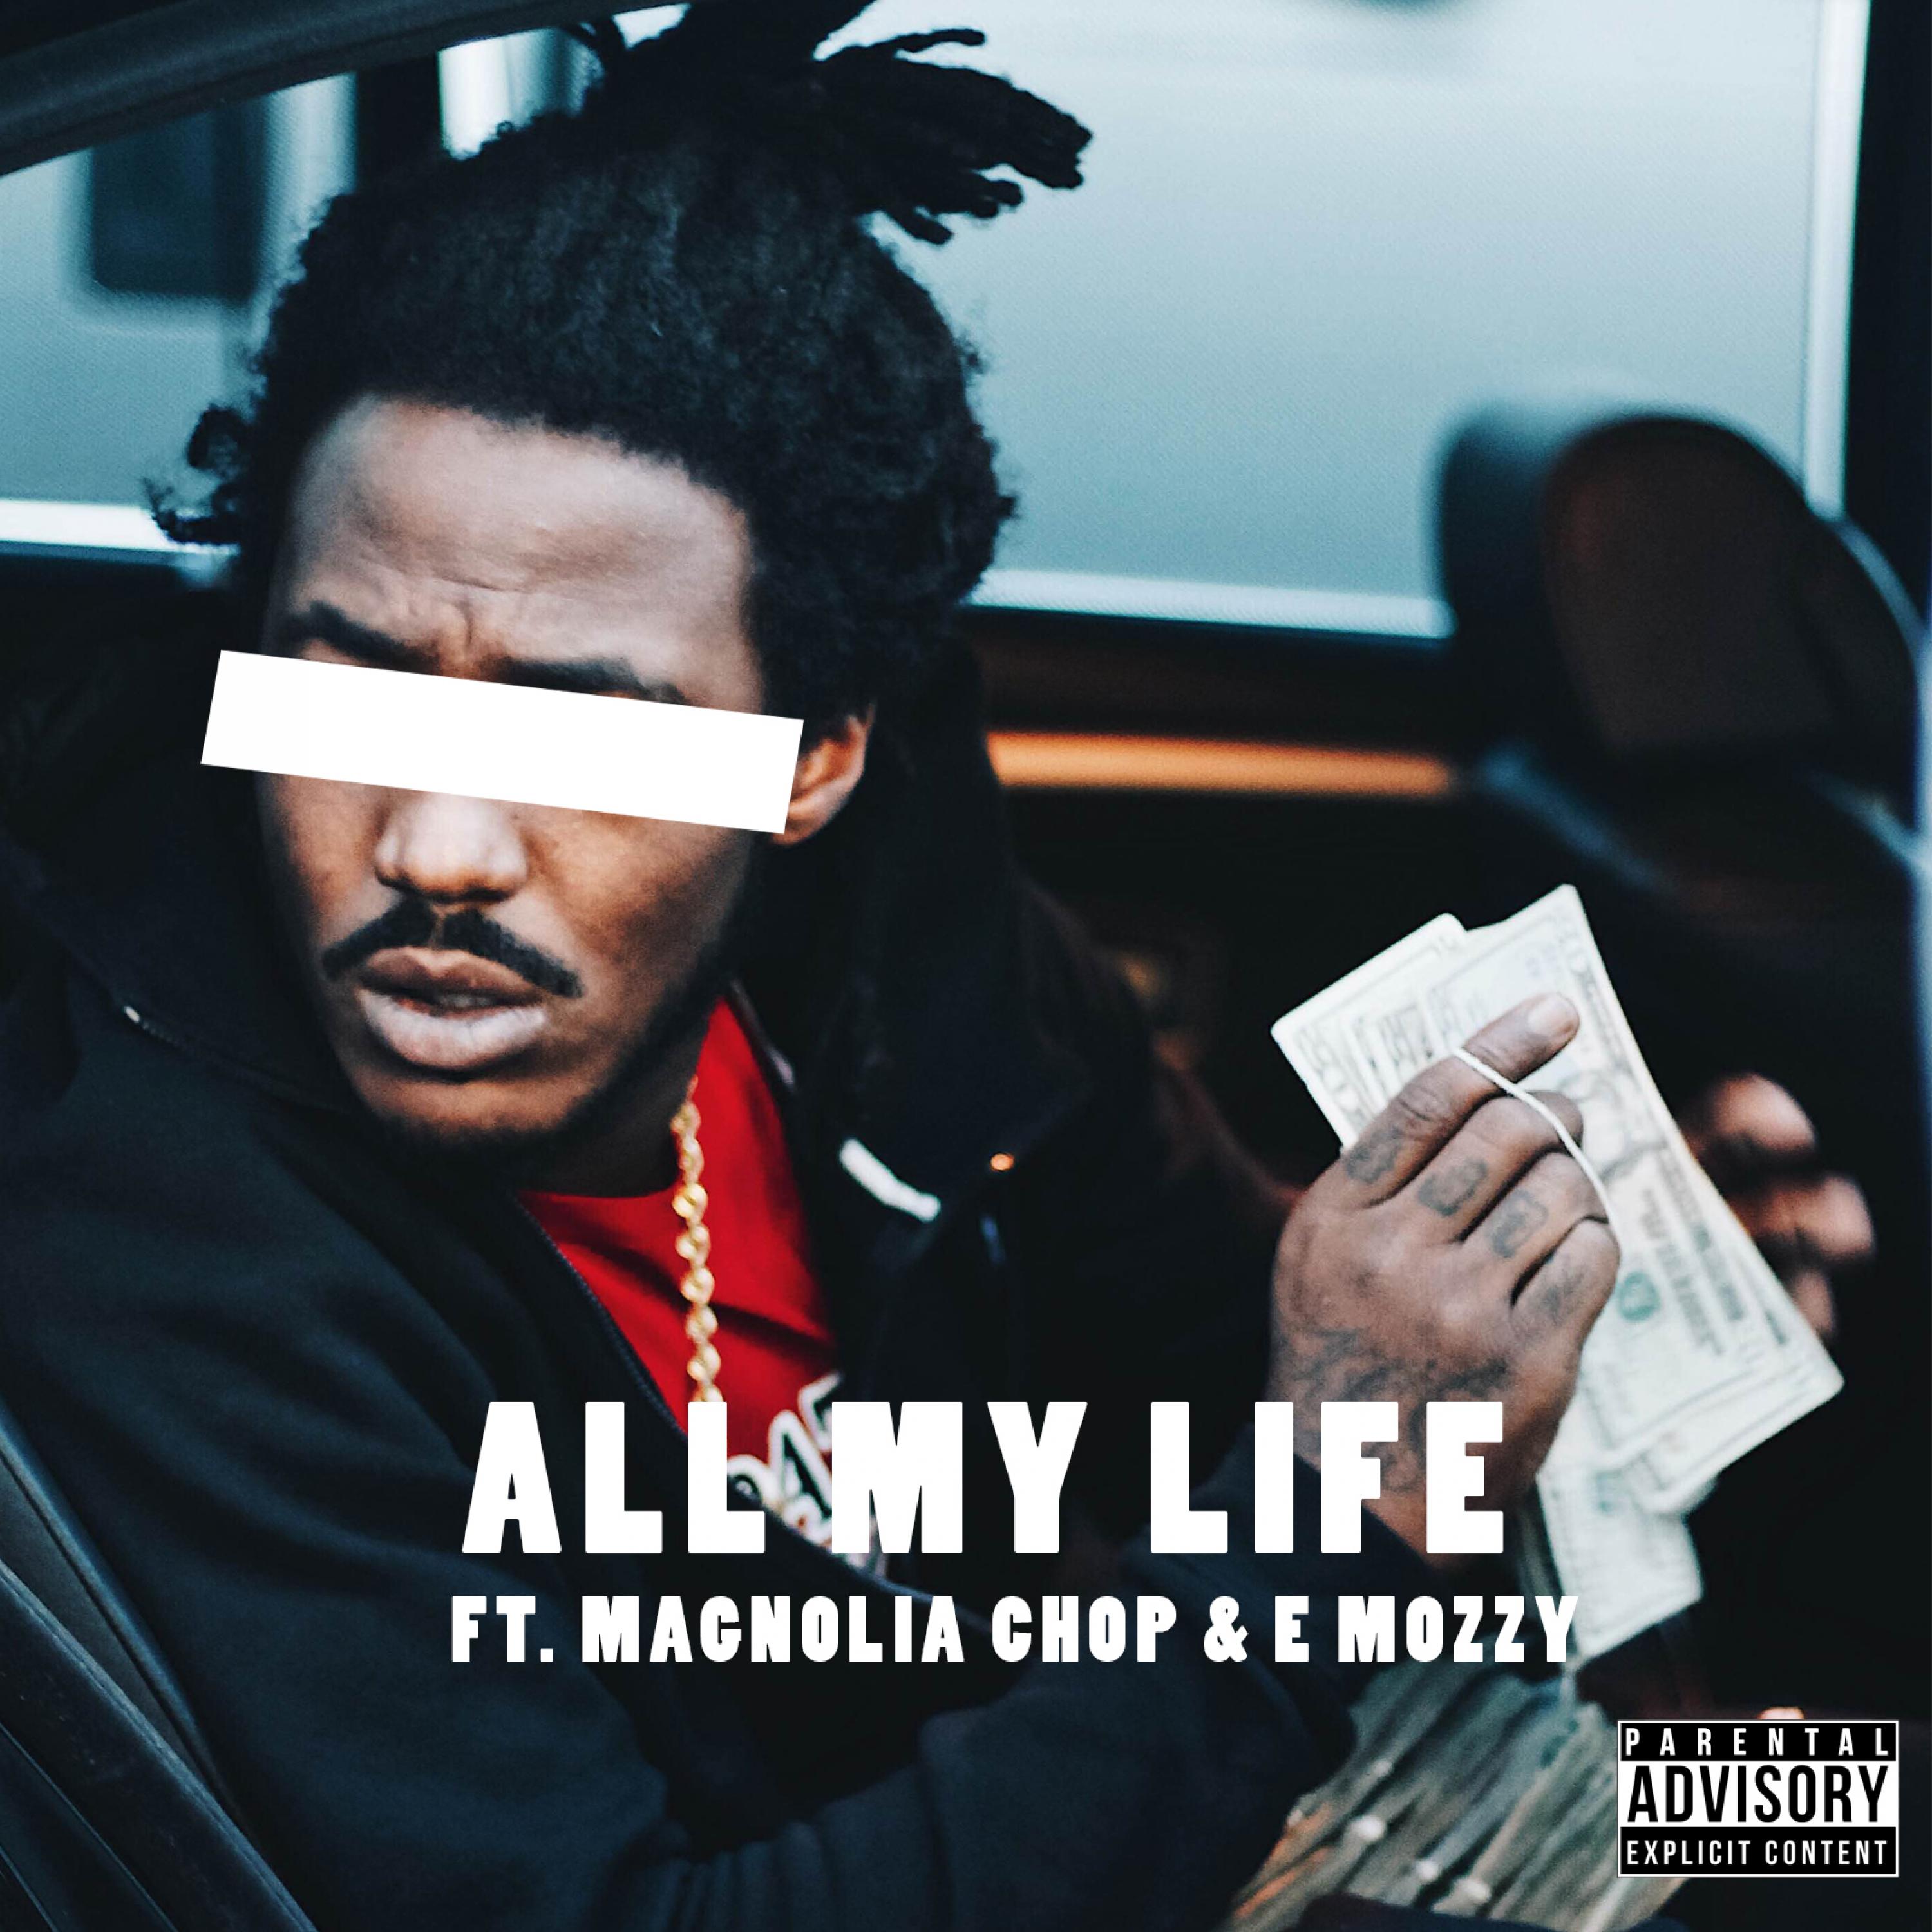 All My Life (feat. Magnolia Chop & E Mozzy)